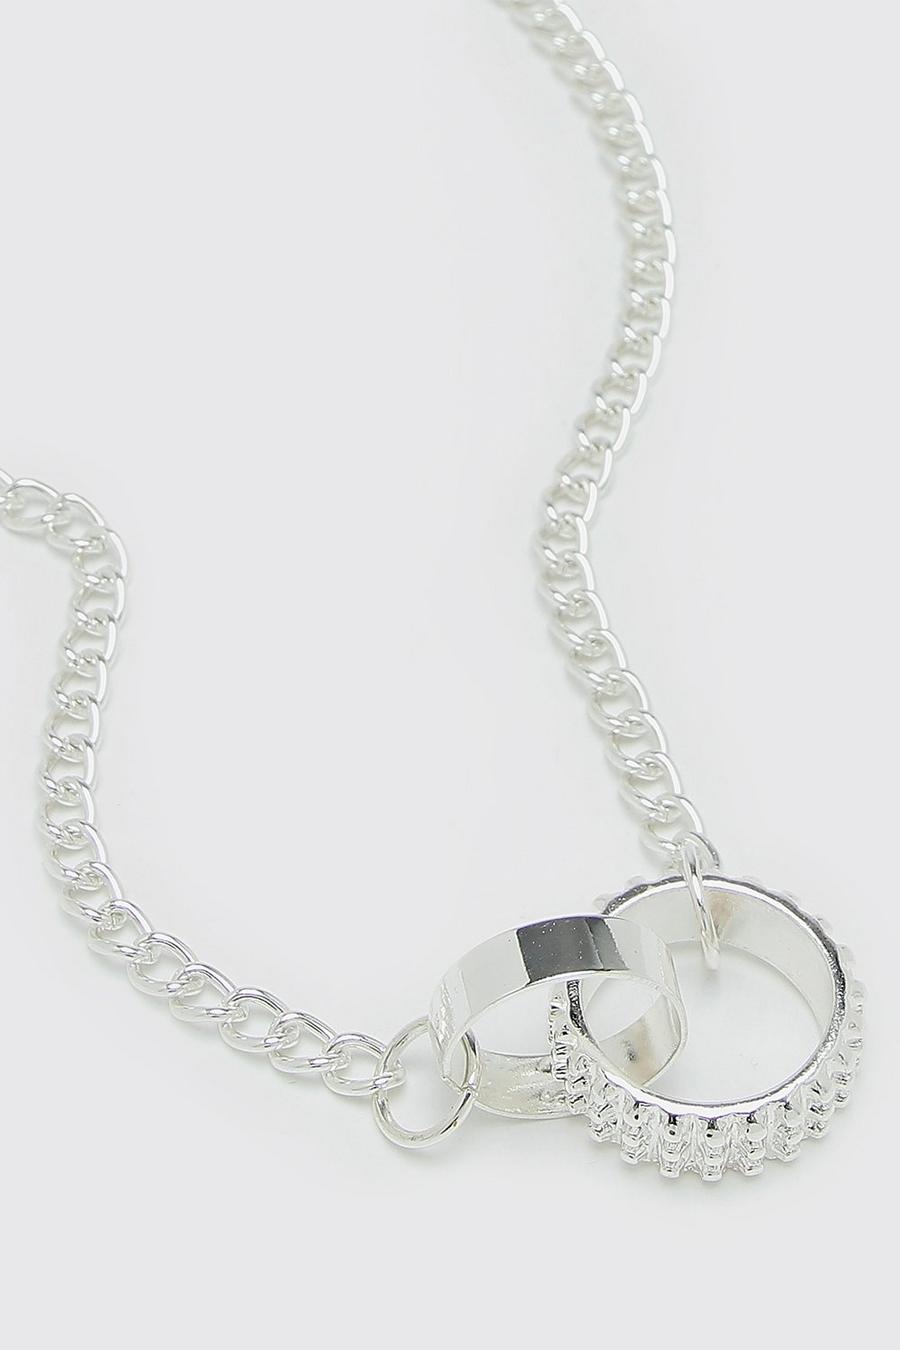 Silver Double Ring Necklace